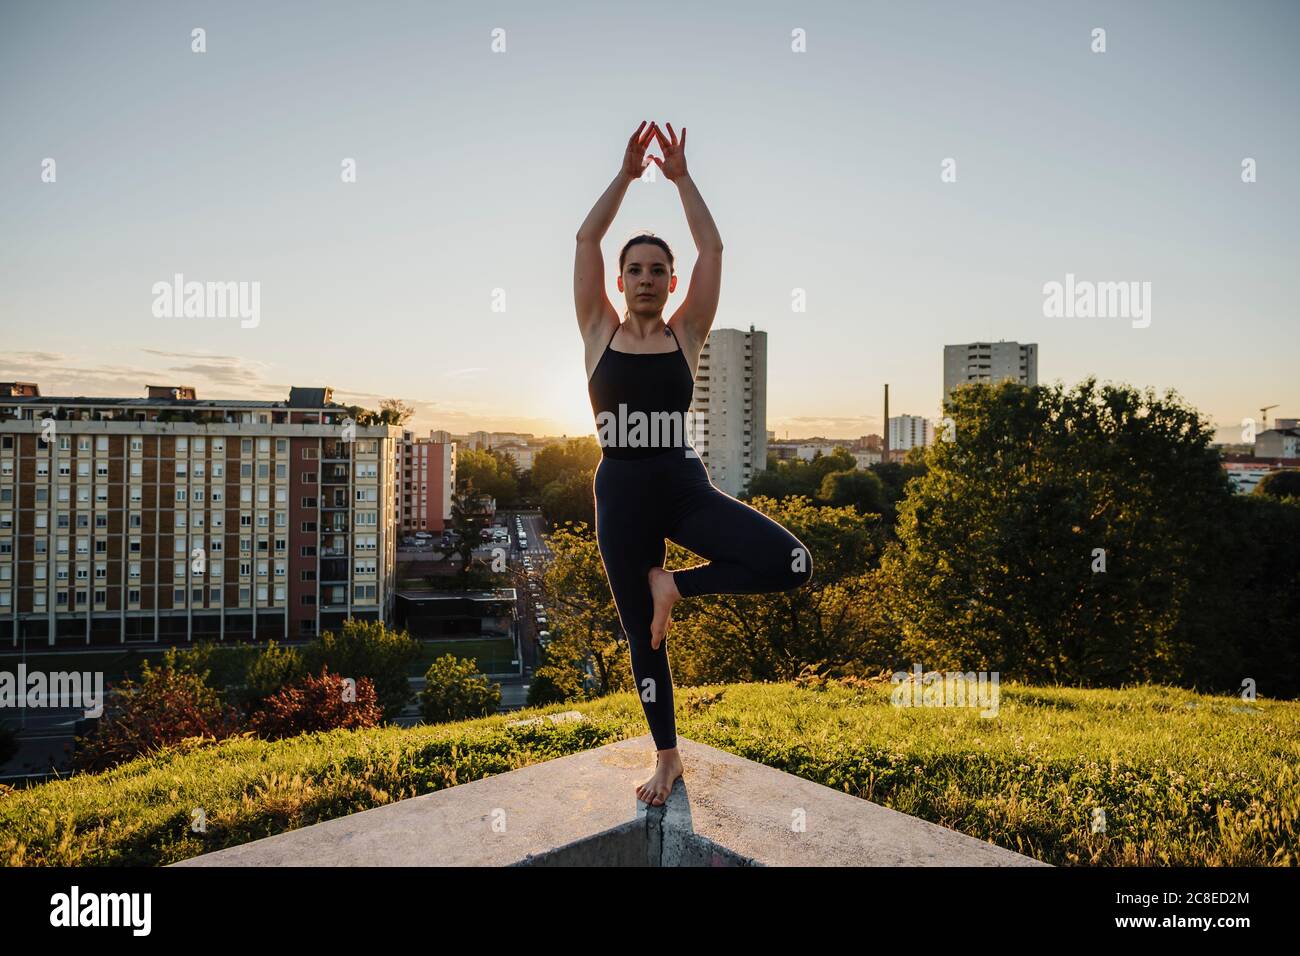 young woman practicing yoga in tree pose on retaining wall in city during sunset 2C8ED2M